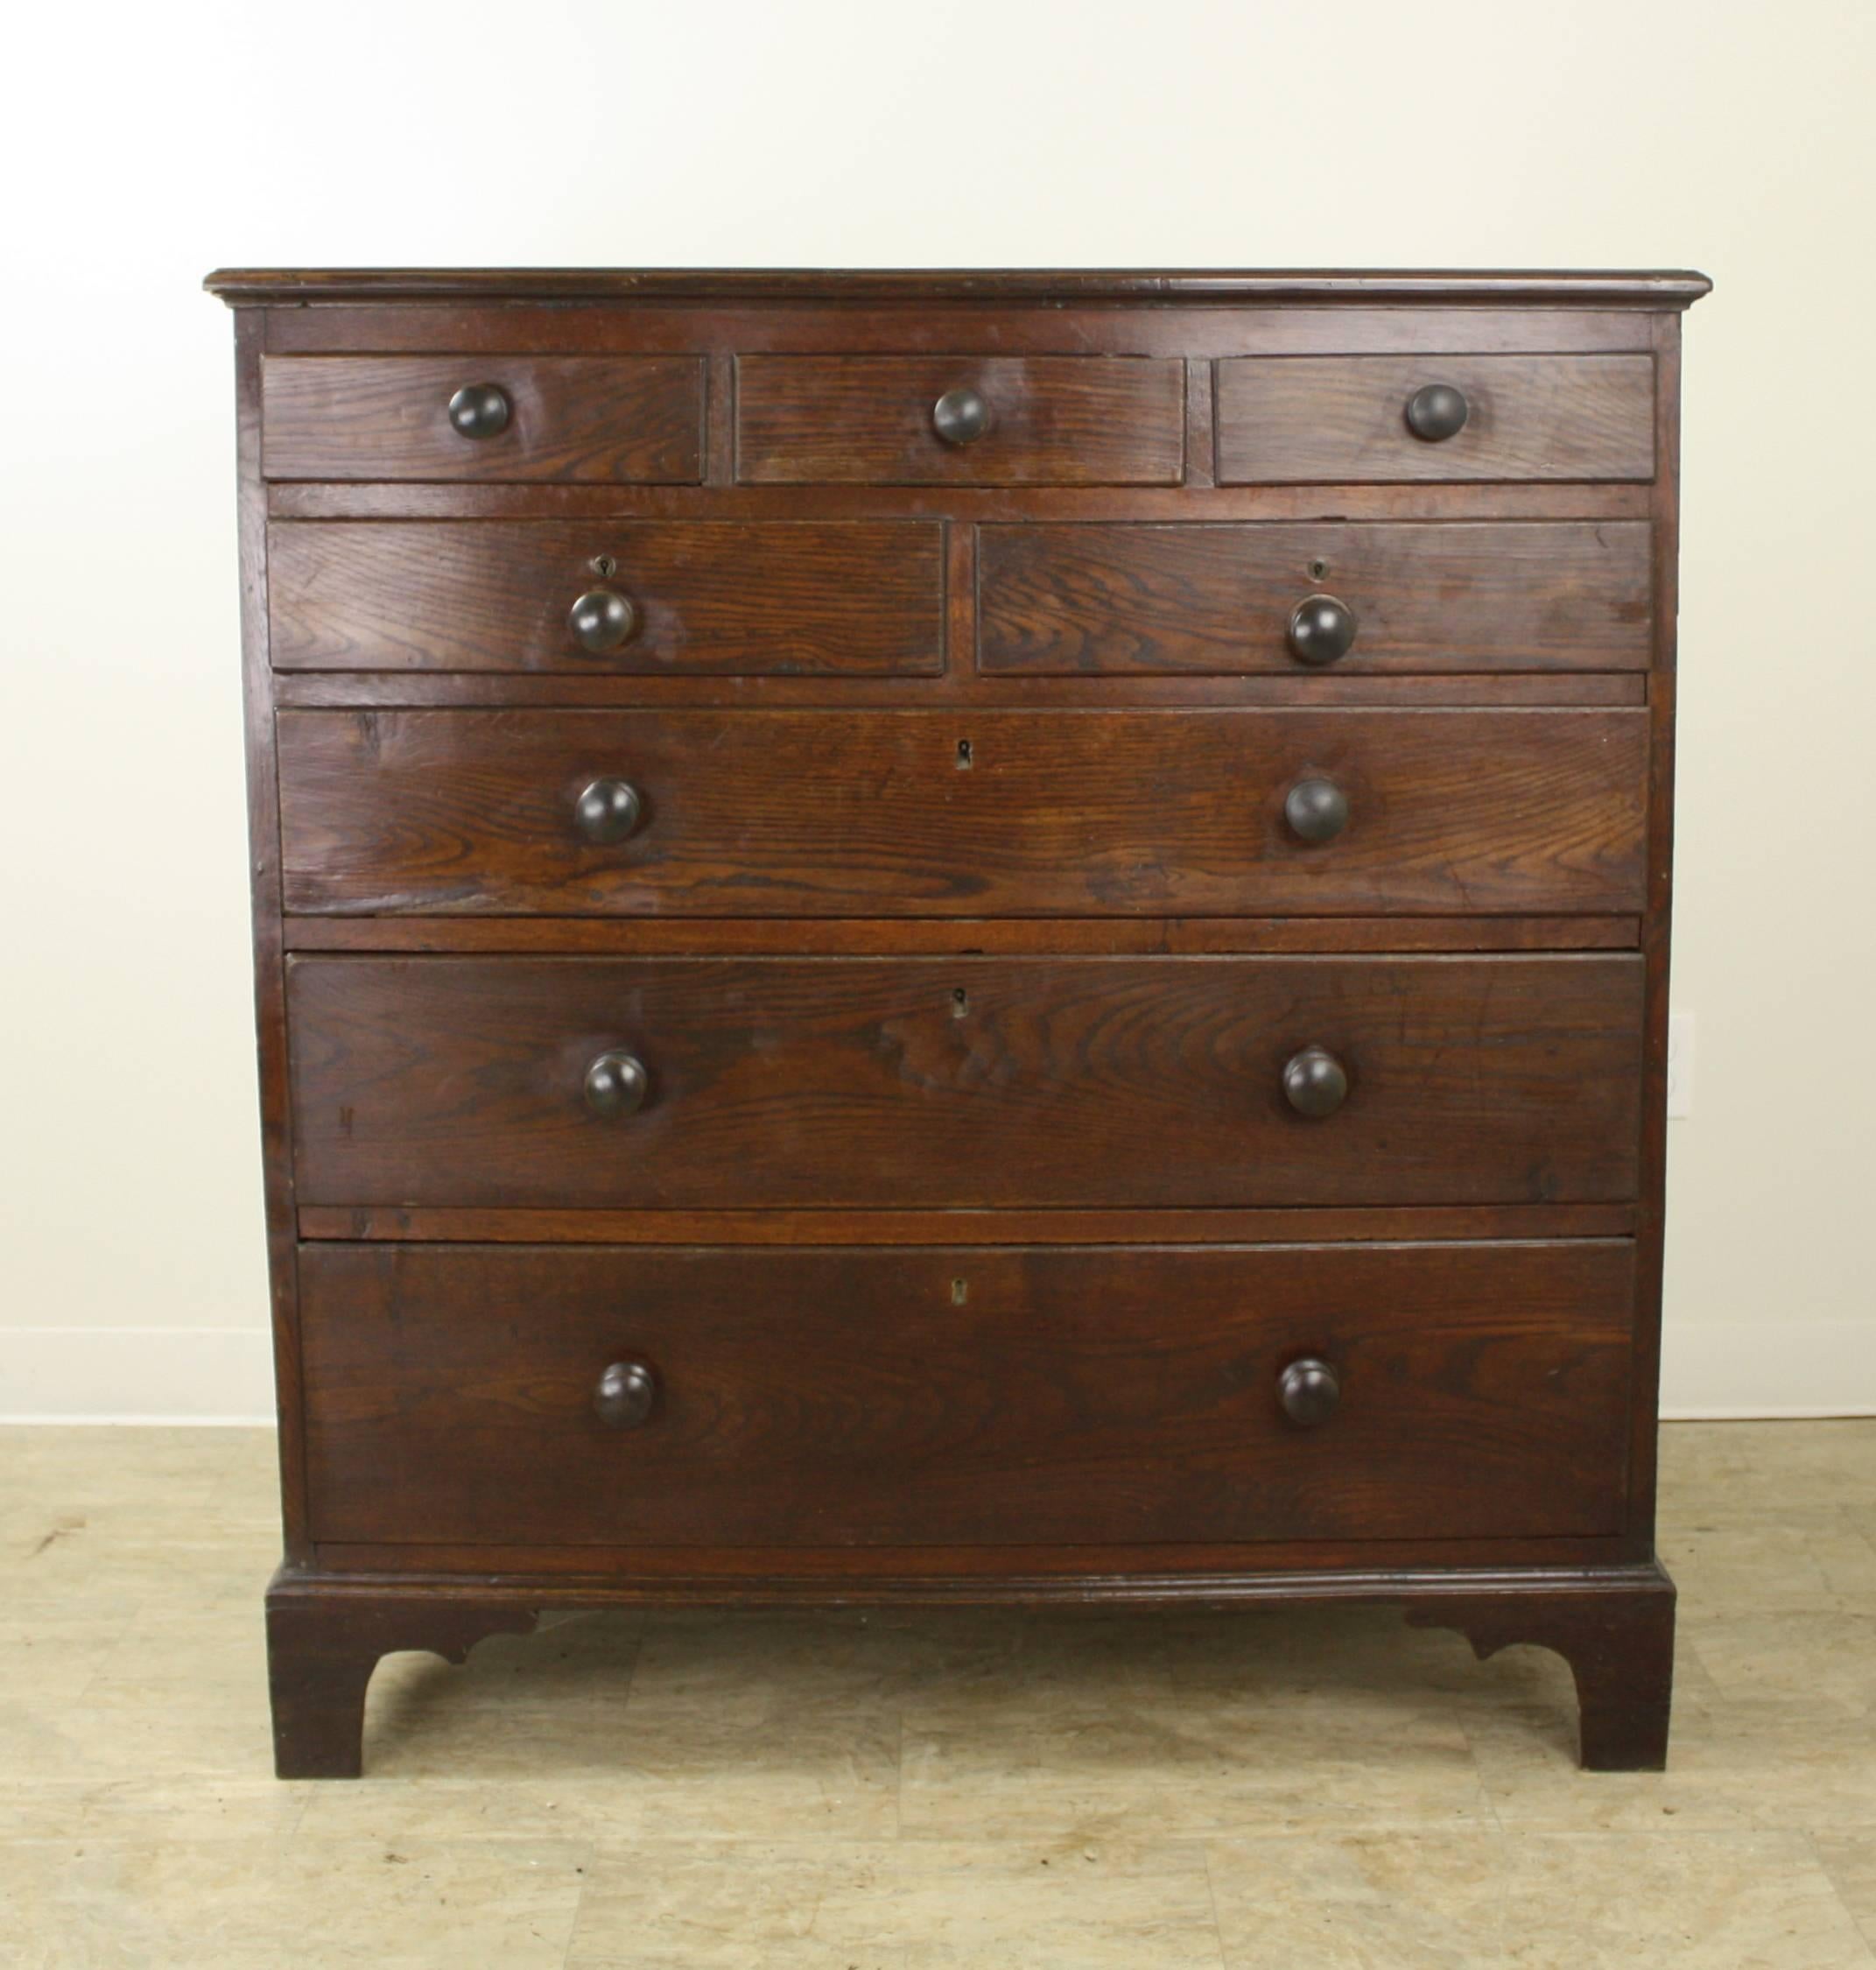 An early dark oak chest of drawers, with nice rich color and patina. The design of the piece, with three drawers over two over three, has loads of visual impact, as well as the practicality of lots of storage. Large round knobs and bracket feet